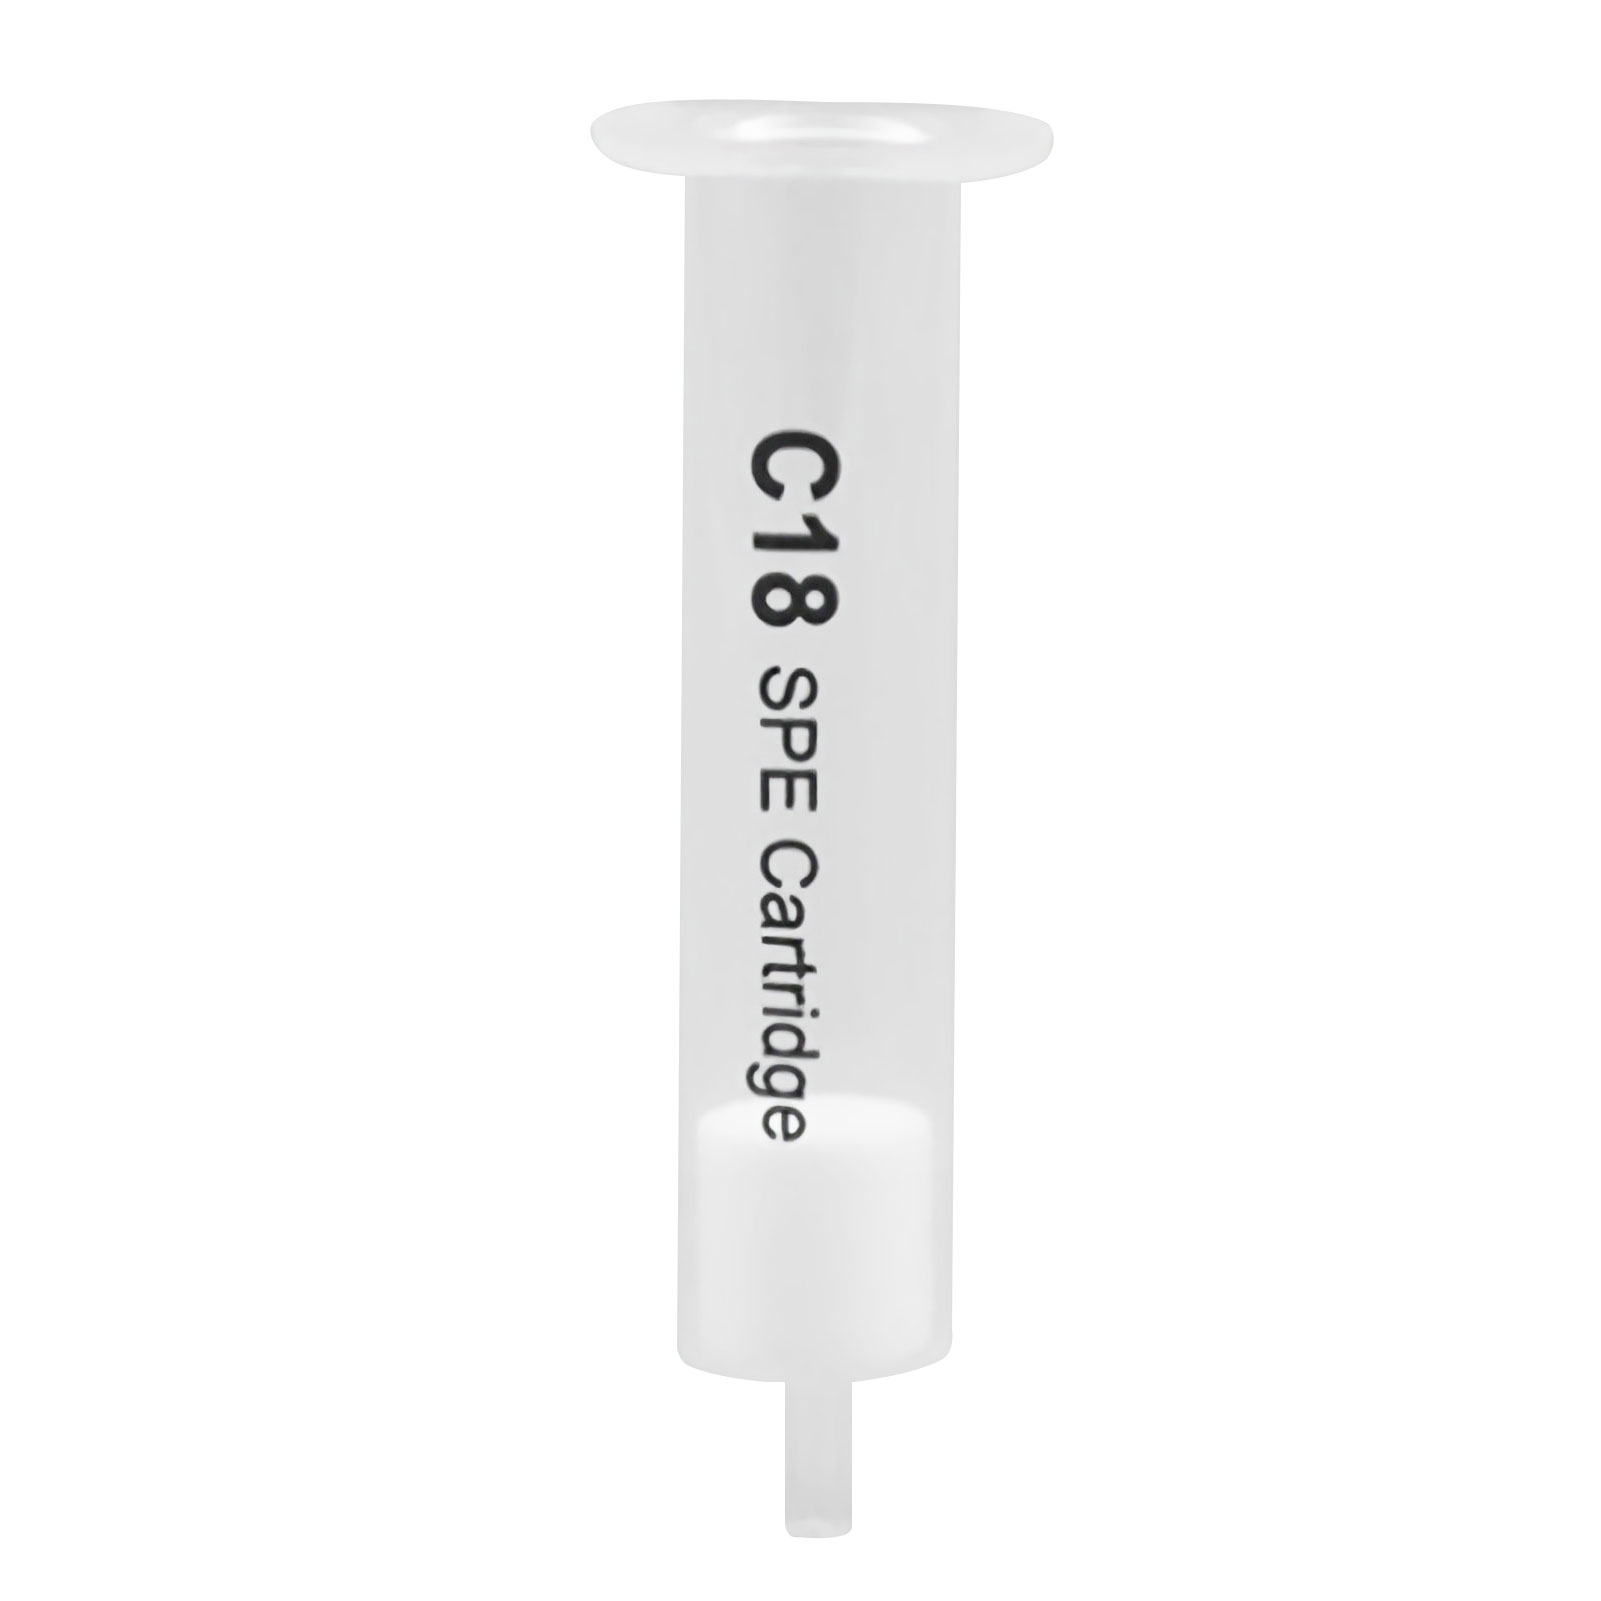 ADAMAS BETA Solid Extraction Column PP C18/MCX/HLB Lab Chromatography Filtration for Biological/Food Detection Experiment